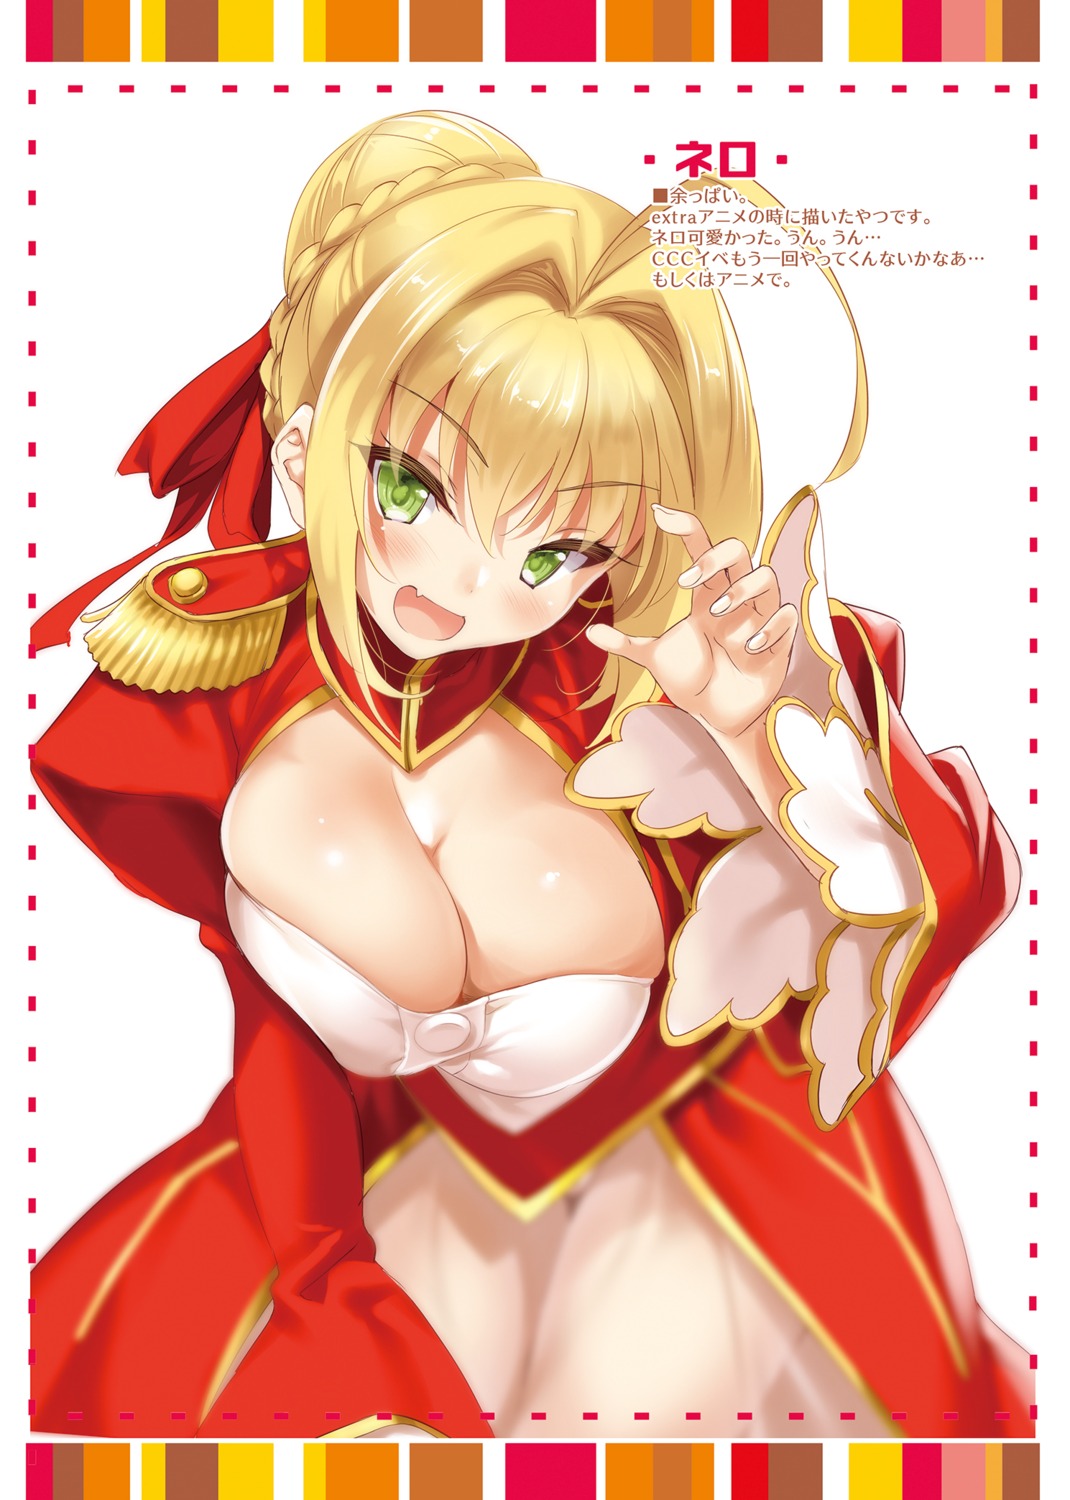 cle_masahiro cleavage clesta dress fate/grand_order saber_extra